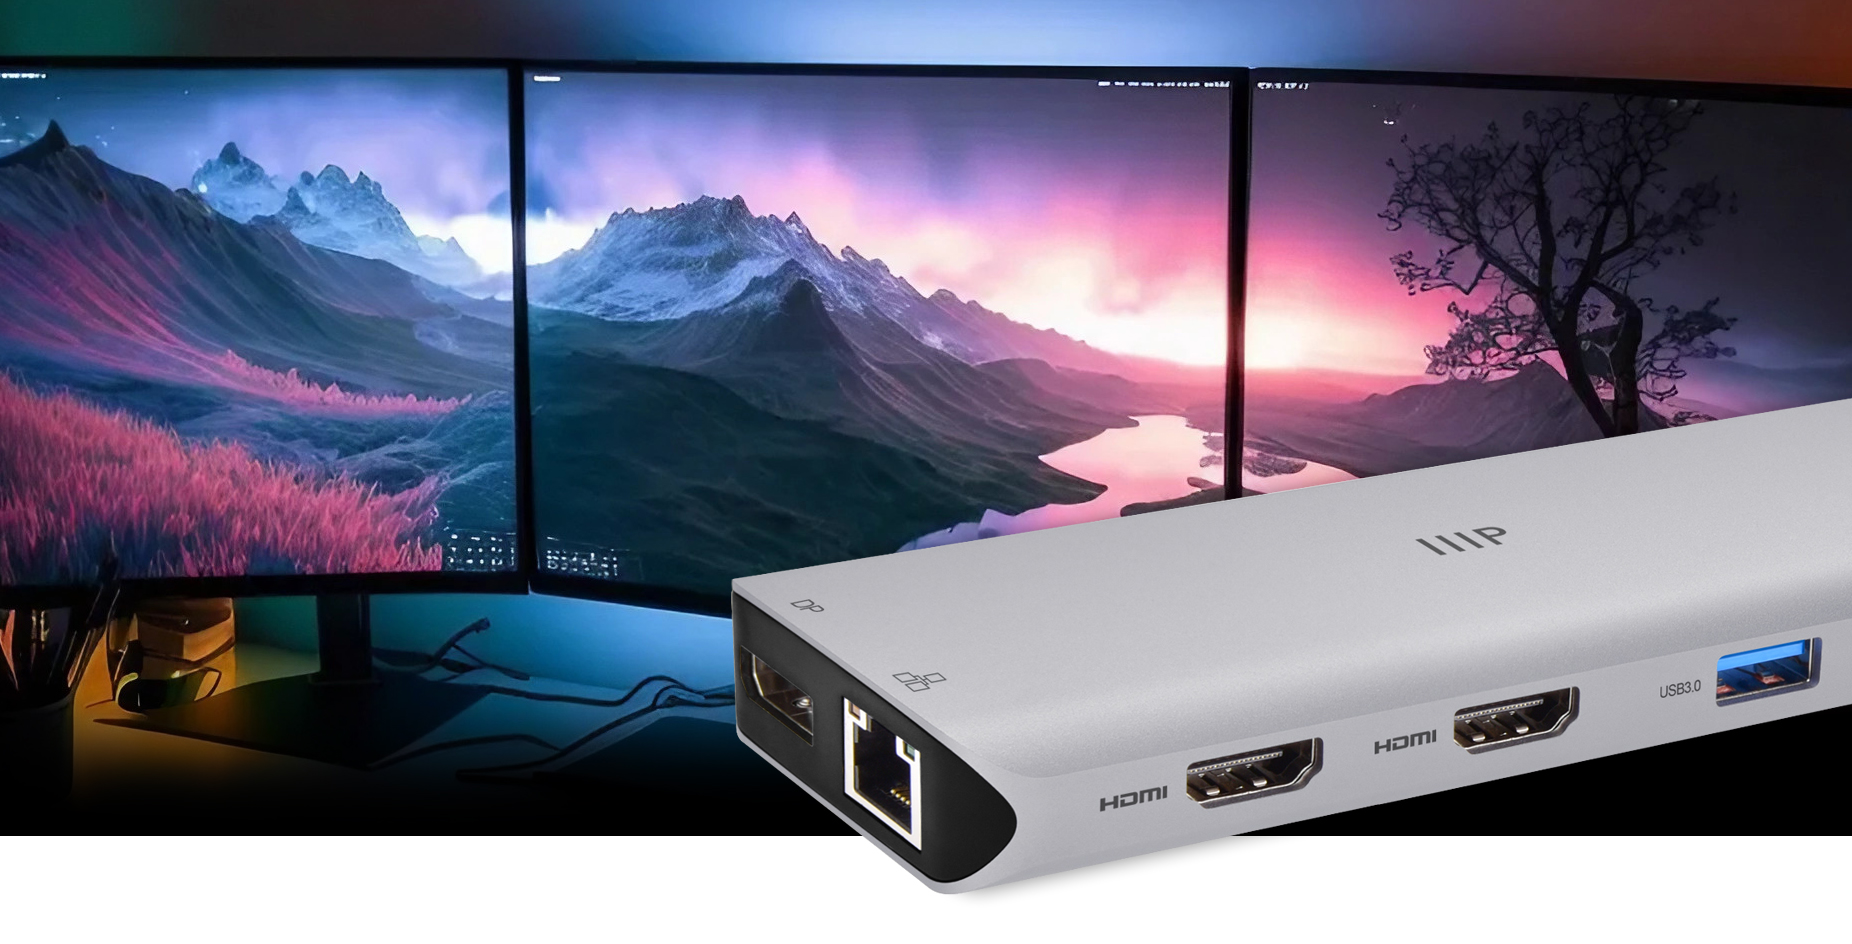 Monoprice USB-C Dual-Monitor Docking Station for USB-C Laptops, MST, and  Power Delivery up to 100W with USB-C Cable 